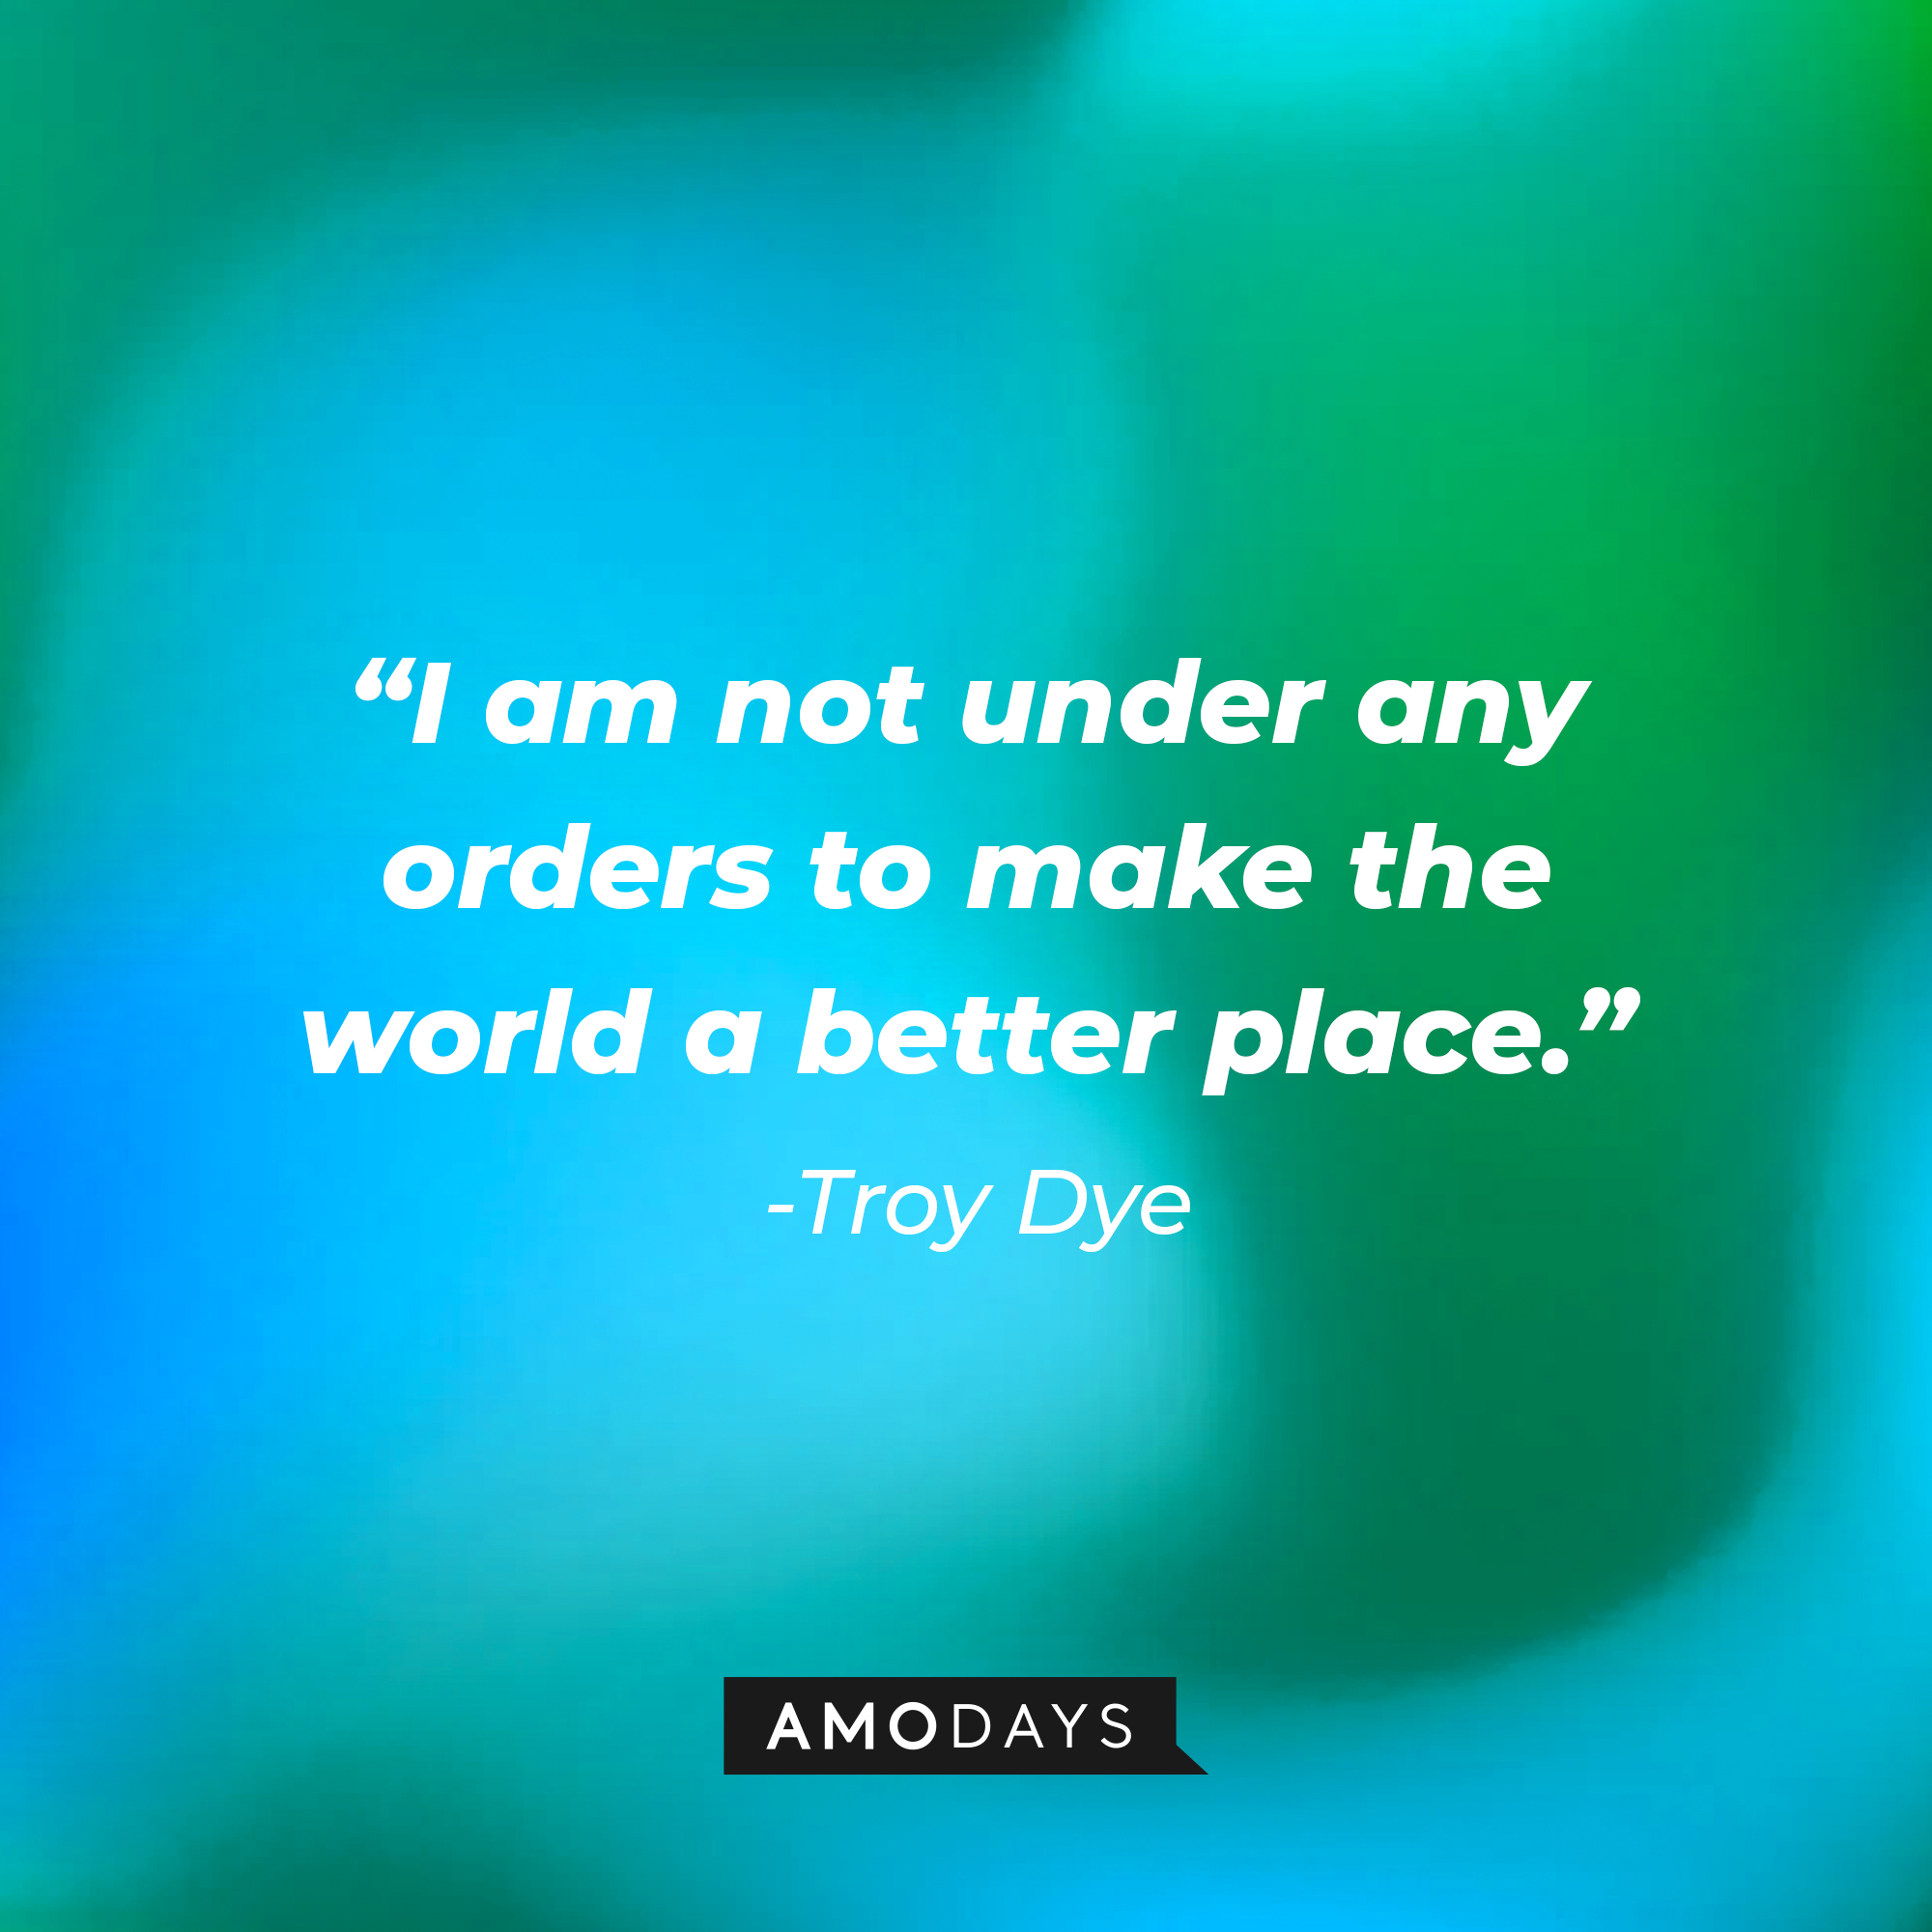 Troy Dyer’s quote: "I am not under any orders to make the world a better place." | Source: AmoDays